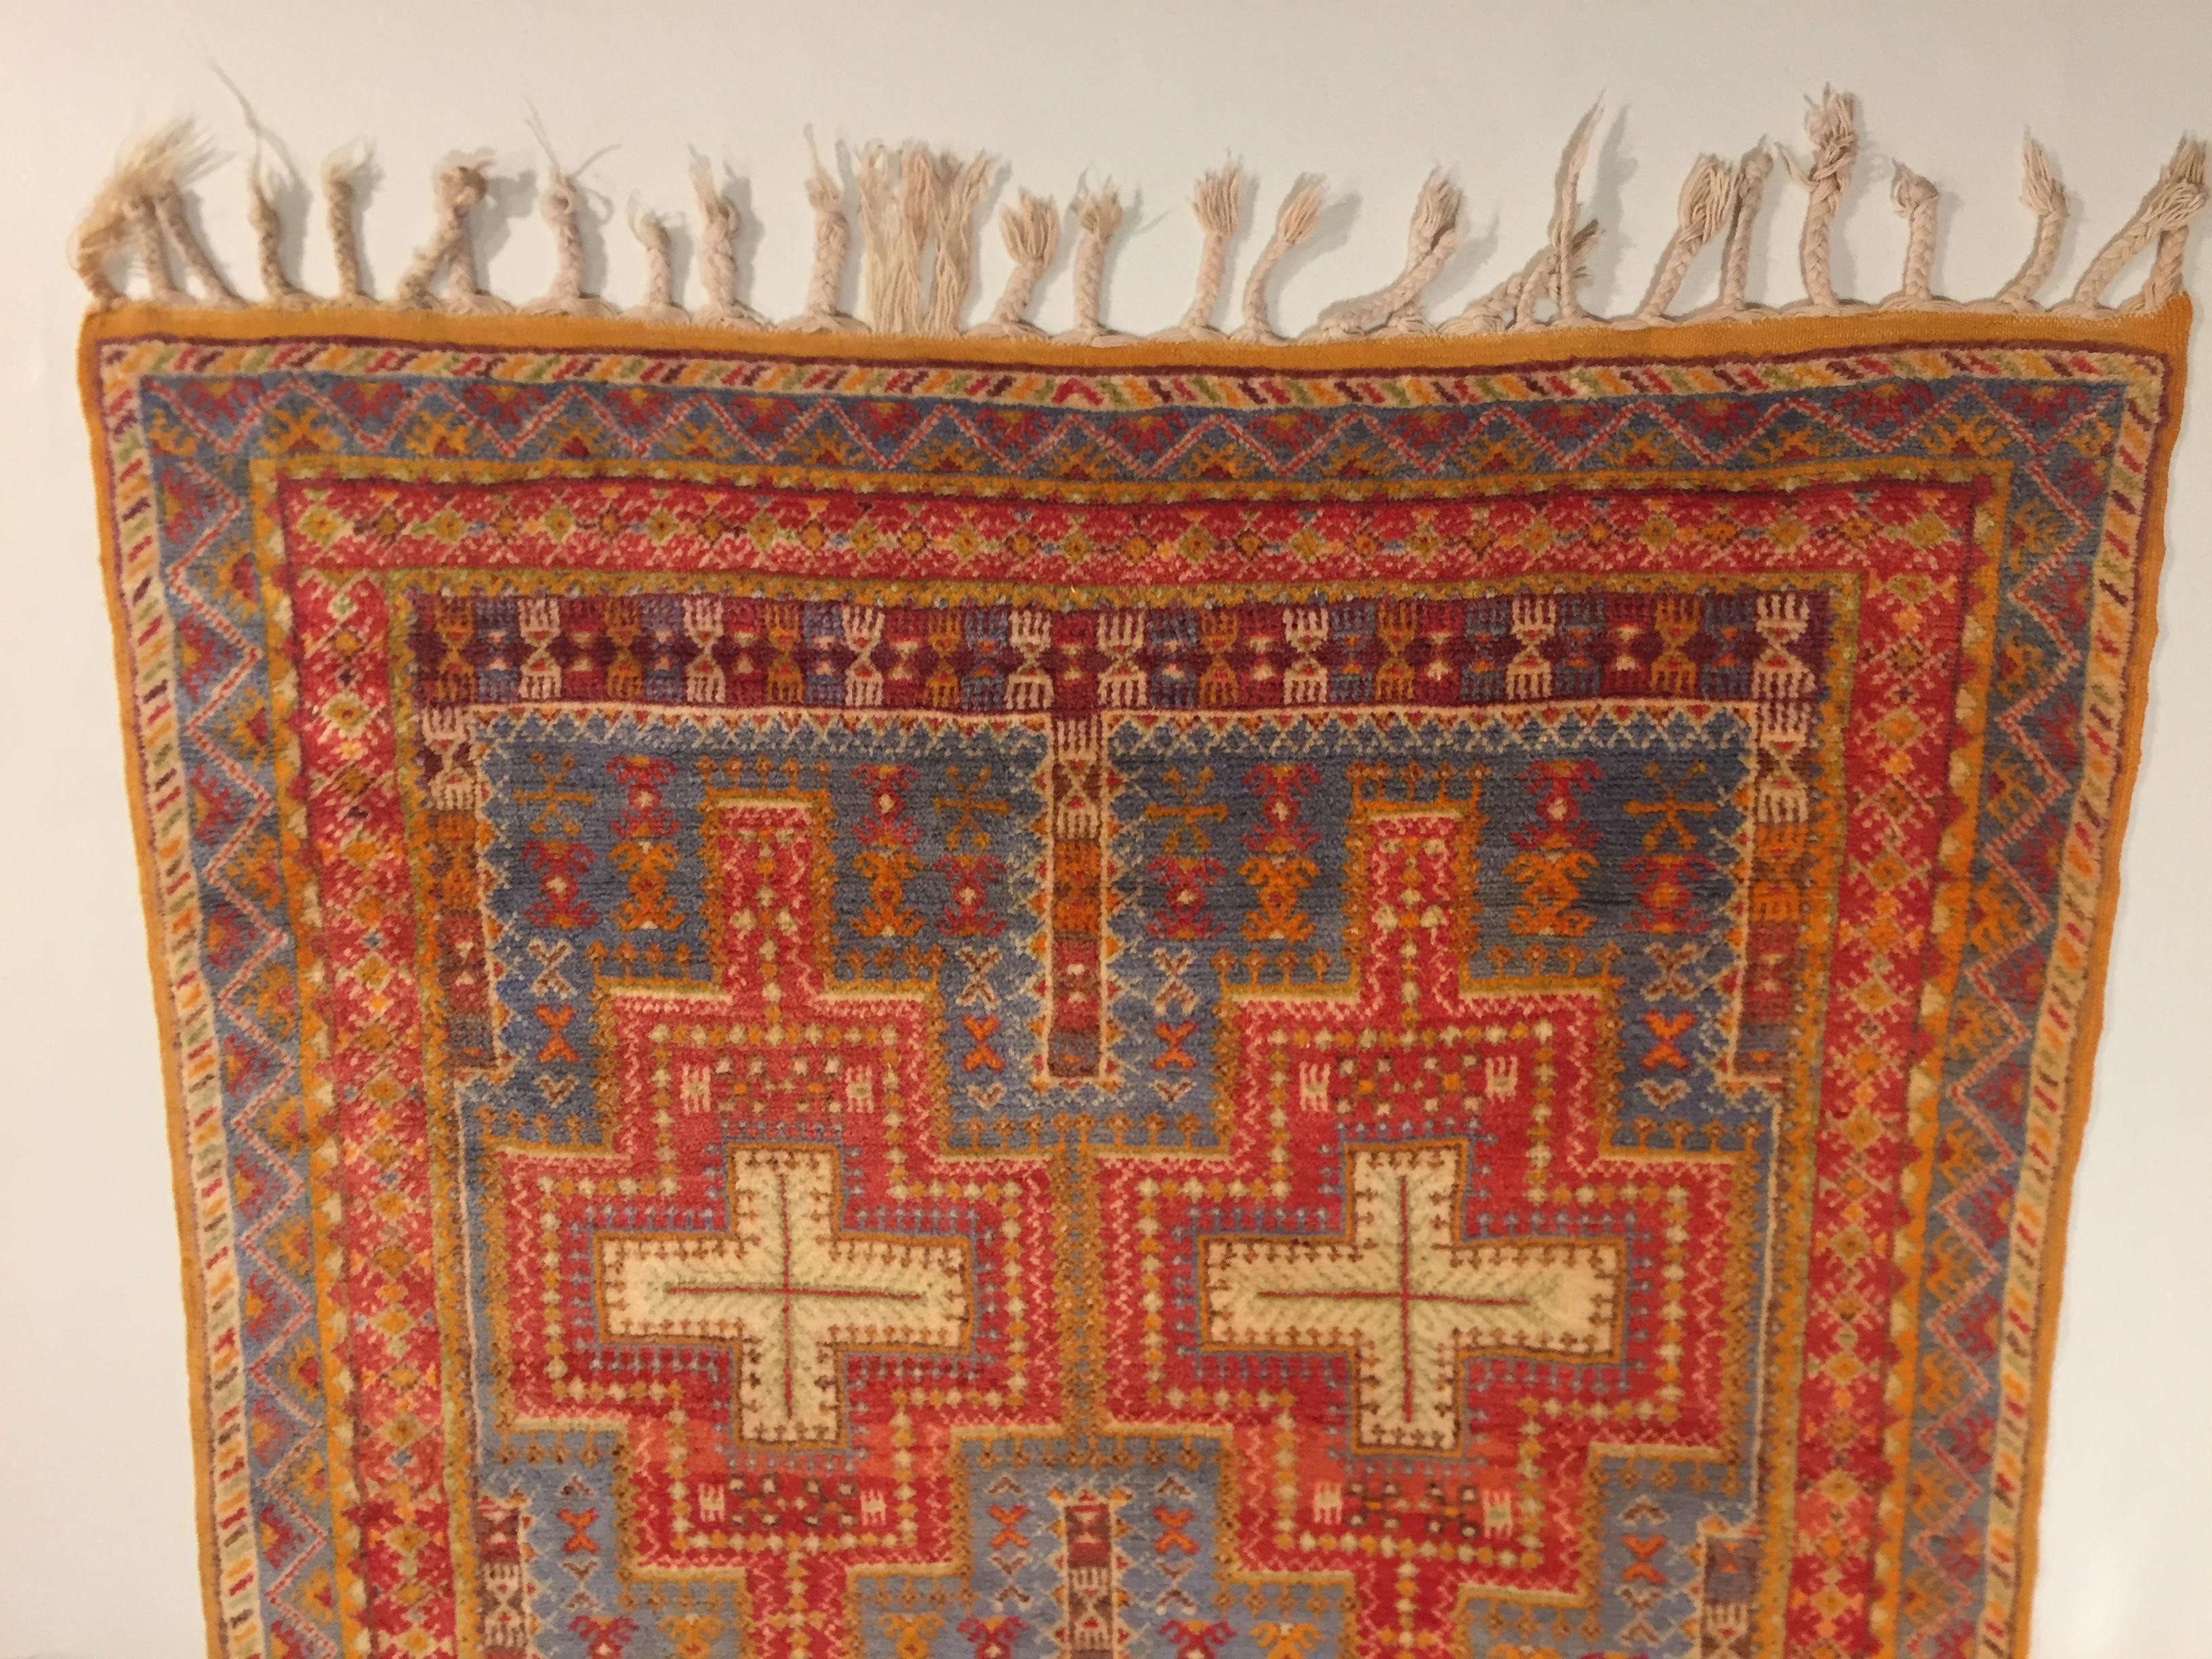 Berber carpet of the Oouauzouite quality. This type of rug is characterized by a saffron yellow wool structure. They are rugs that arise from the imagination of women who, in addition to the classical themes of the culture of the nomad populations,